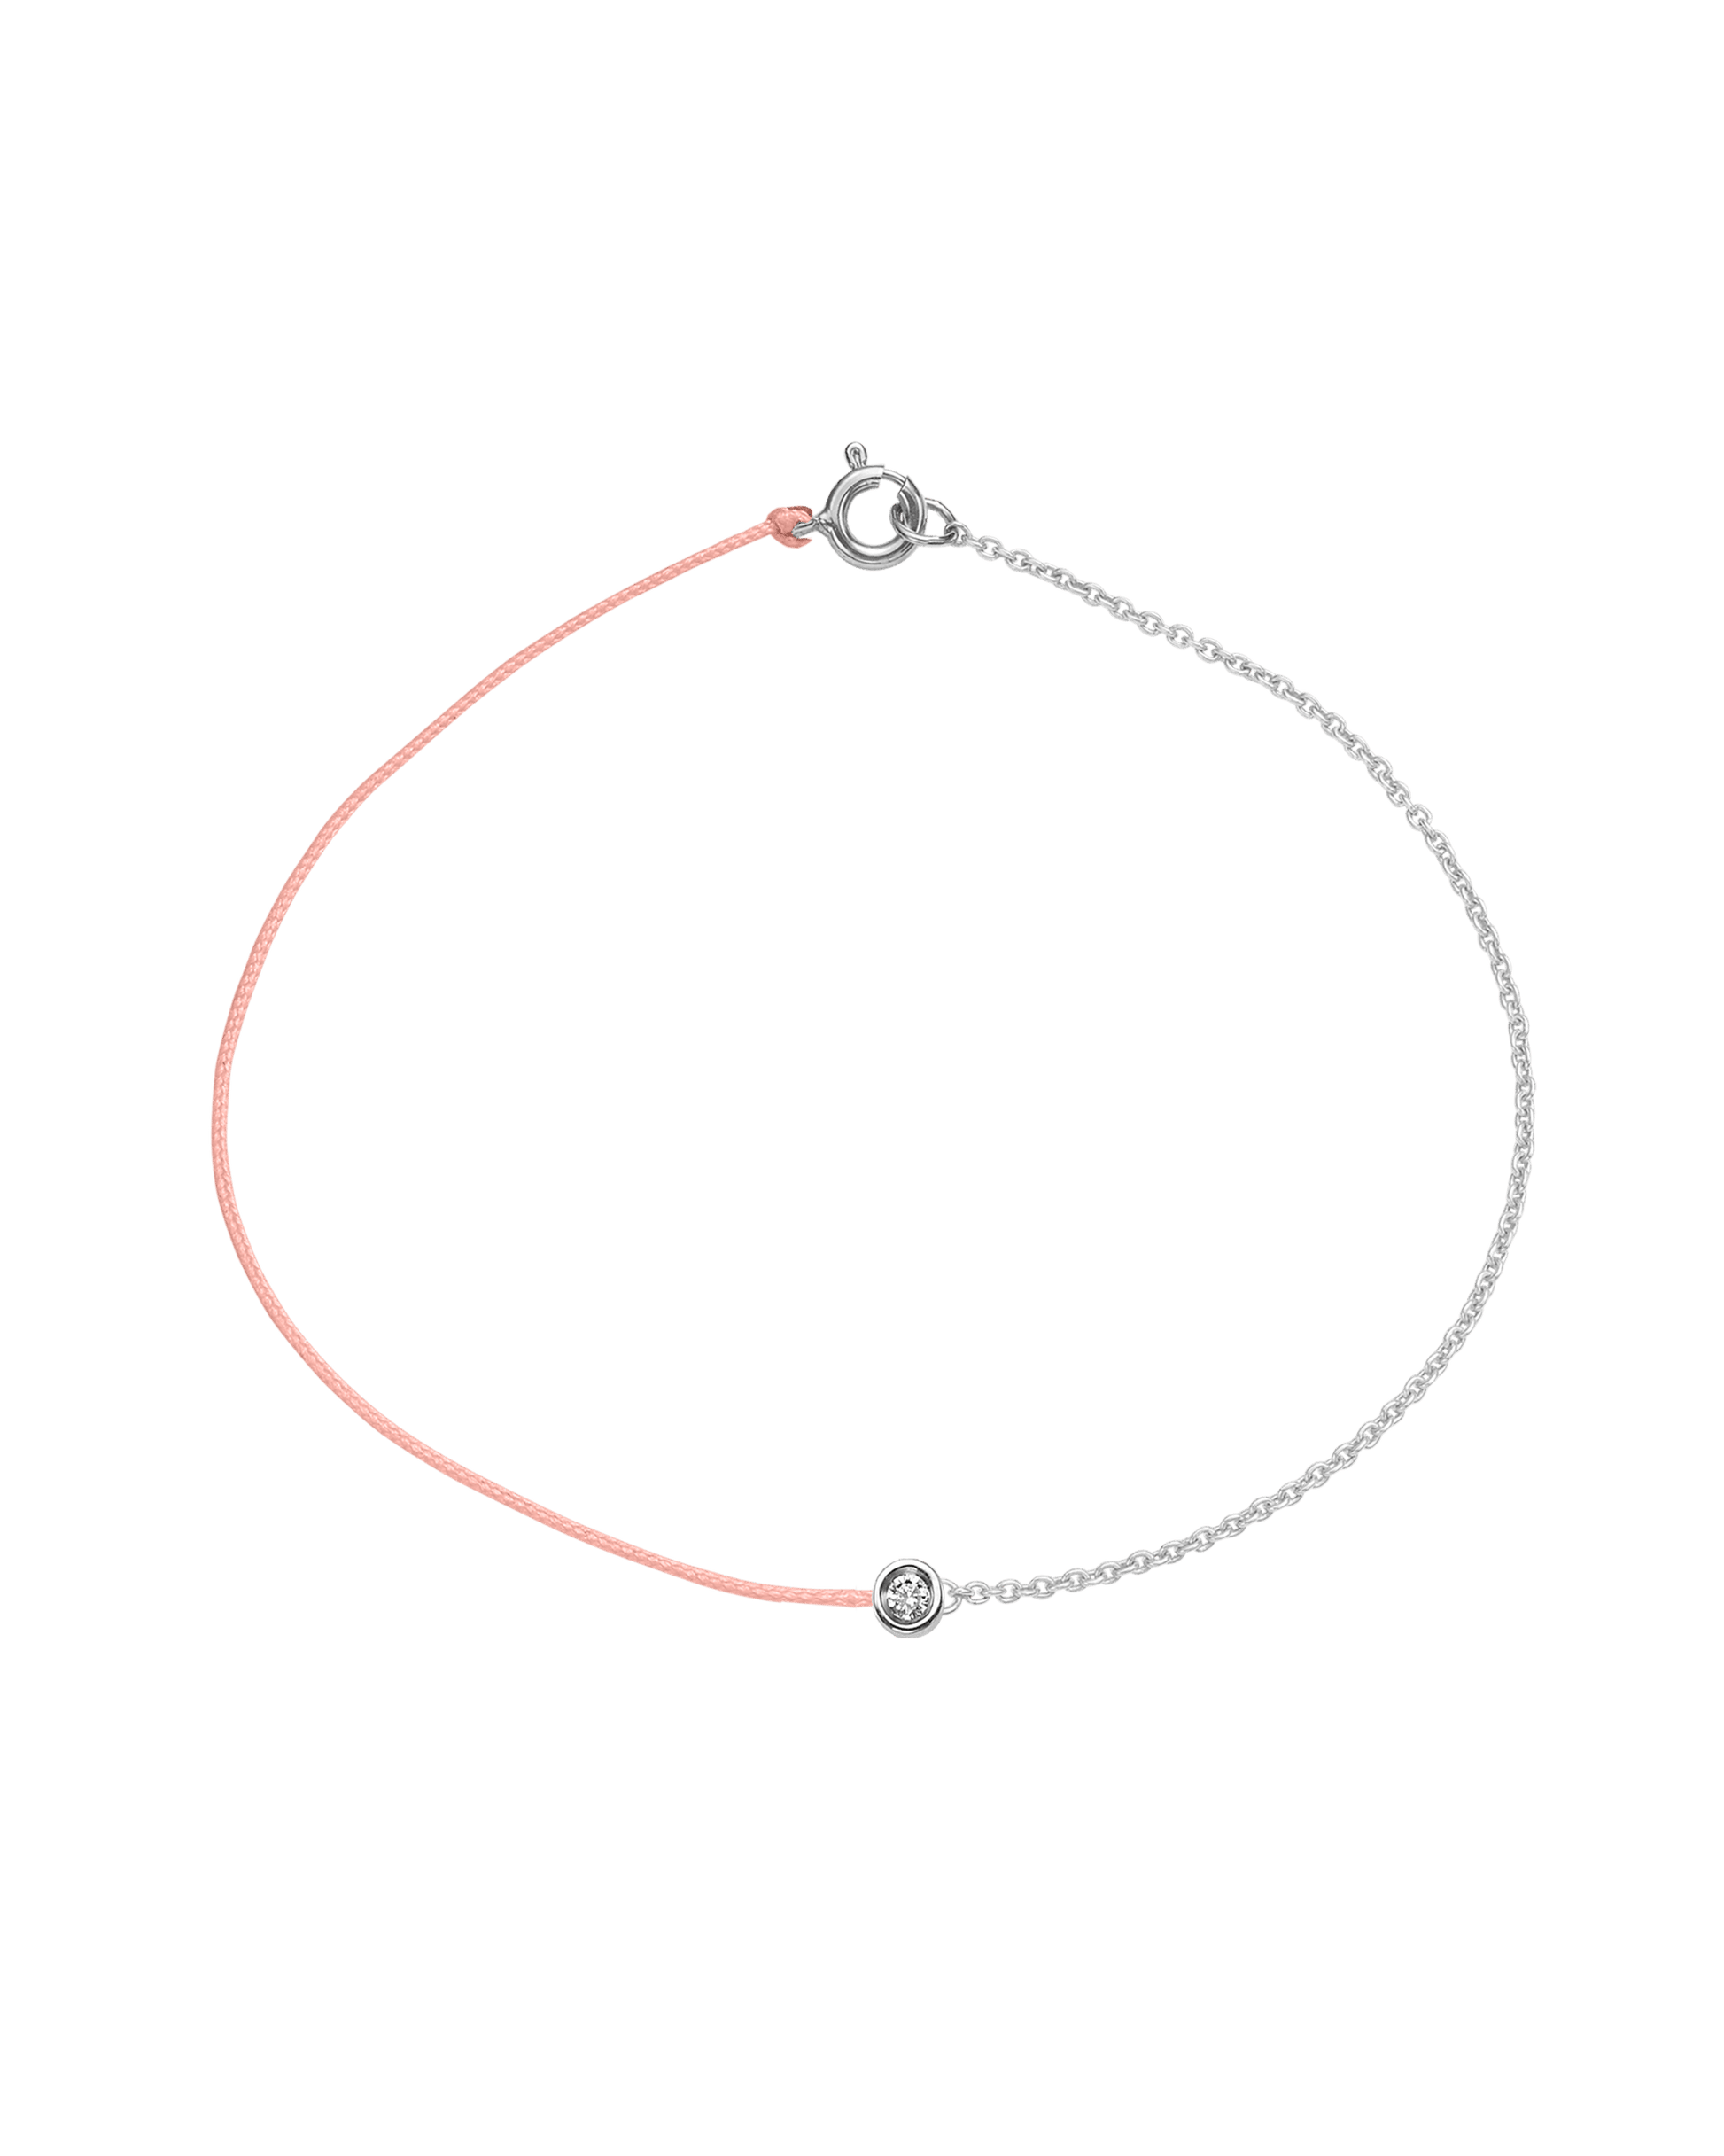 Pink : The Half Chain String of Love - 14K White Gold Bracelet 14K Solid Gold Flamingo Small: 0.03ct Small 6 Inches